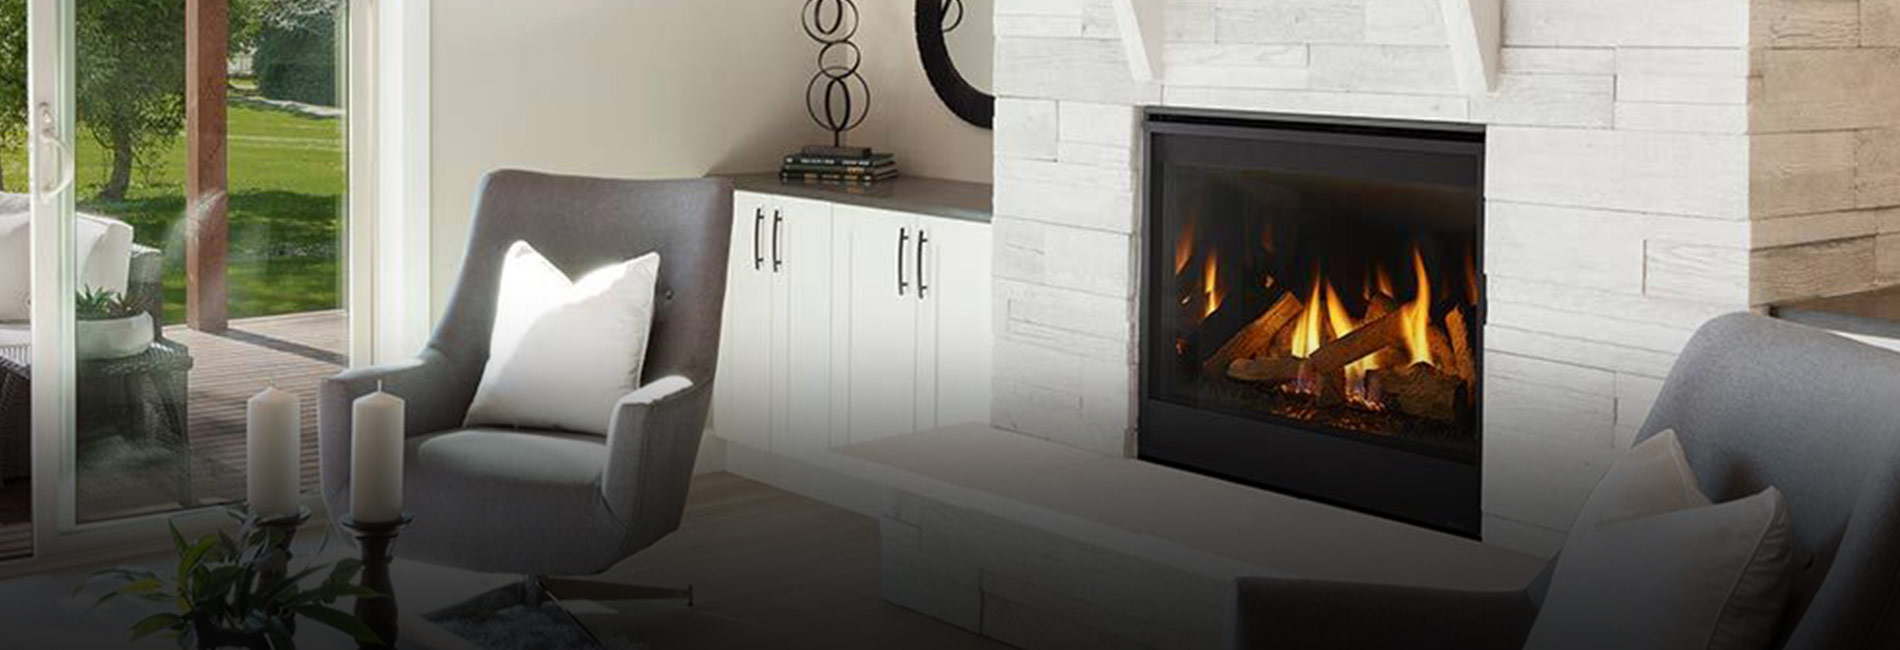 Majestic 30 Ruby Direct Vent Gas Fireplace Insert - Fireplace Deals